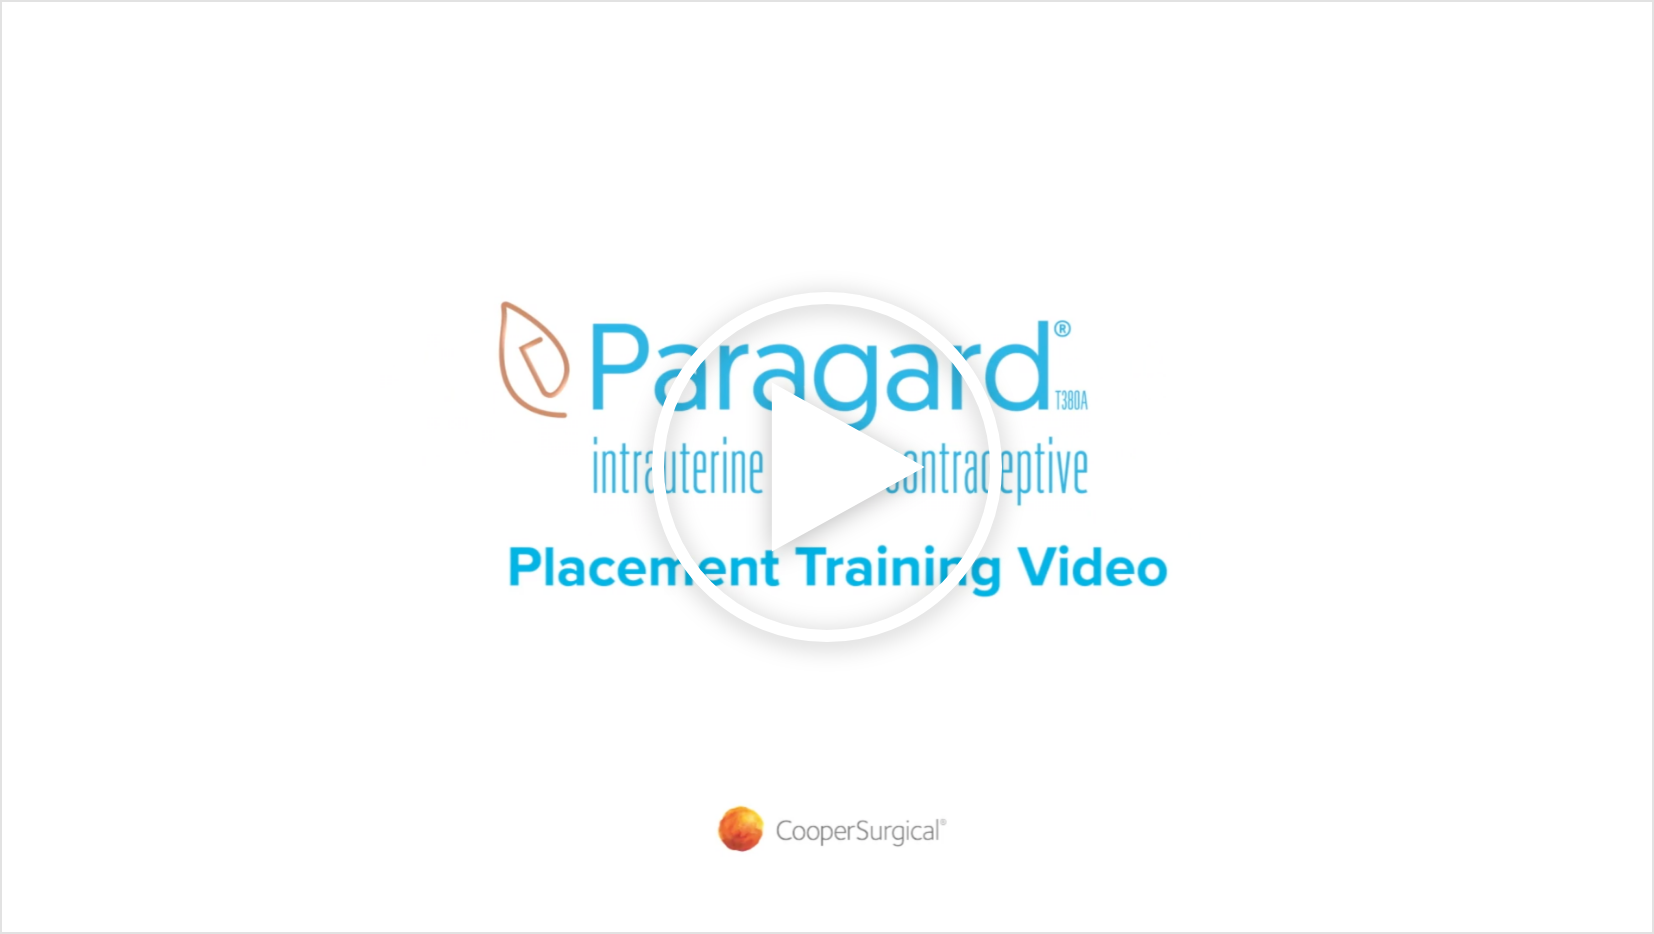 See video on PARAGARD placement